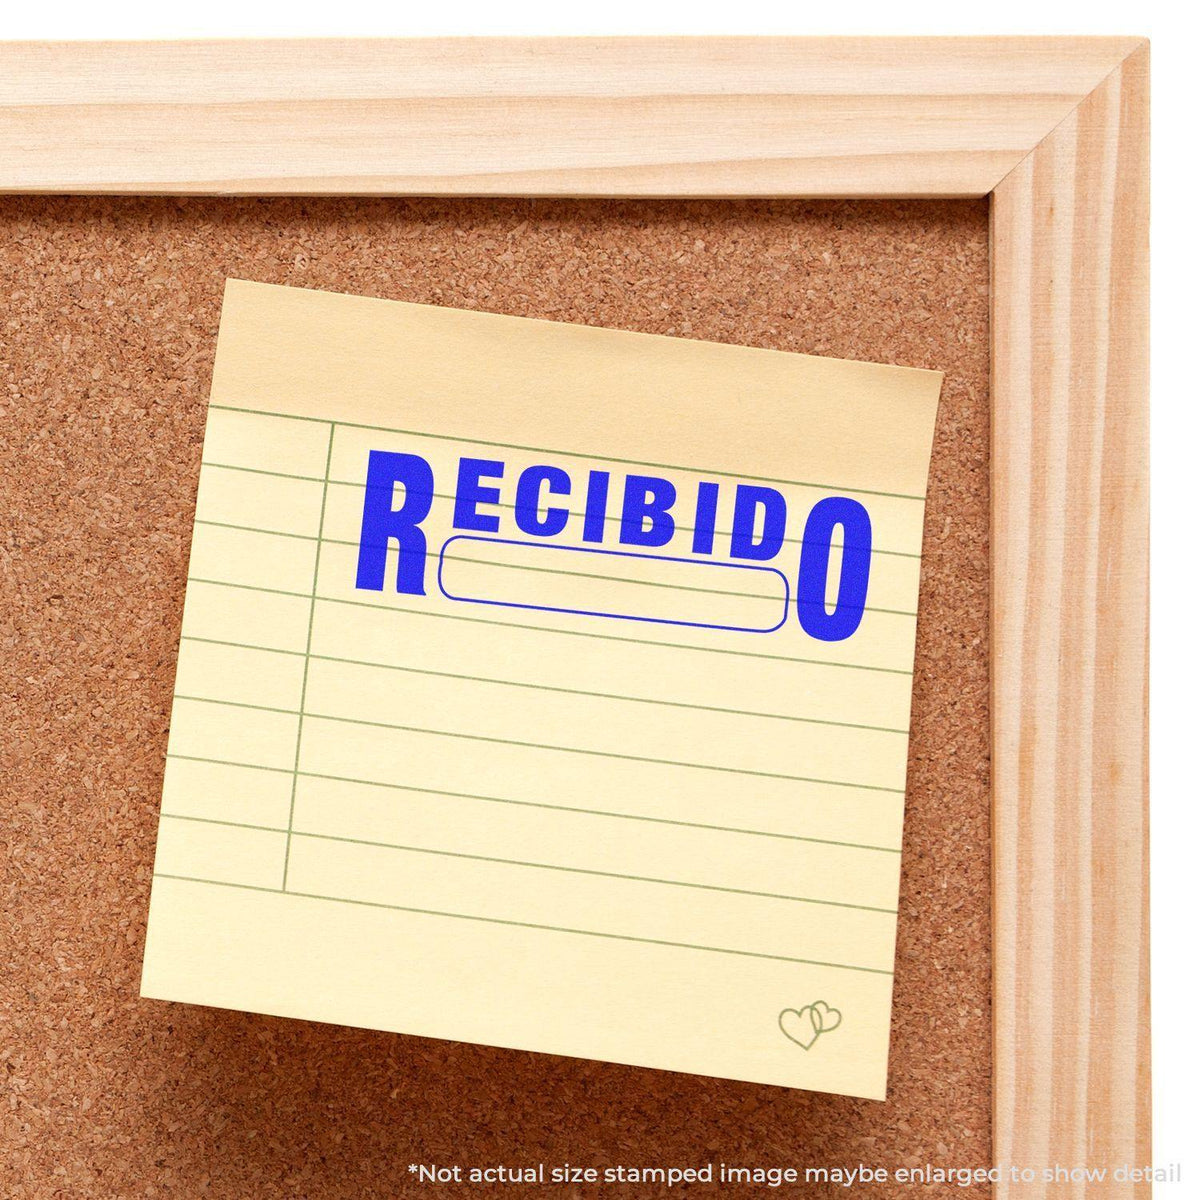 Large Recibido Rubber Stamp In Use Photo